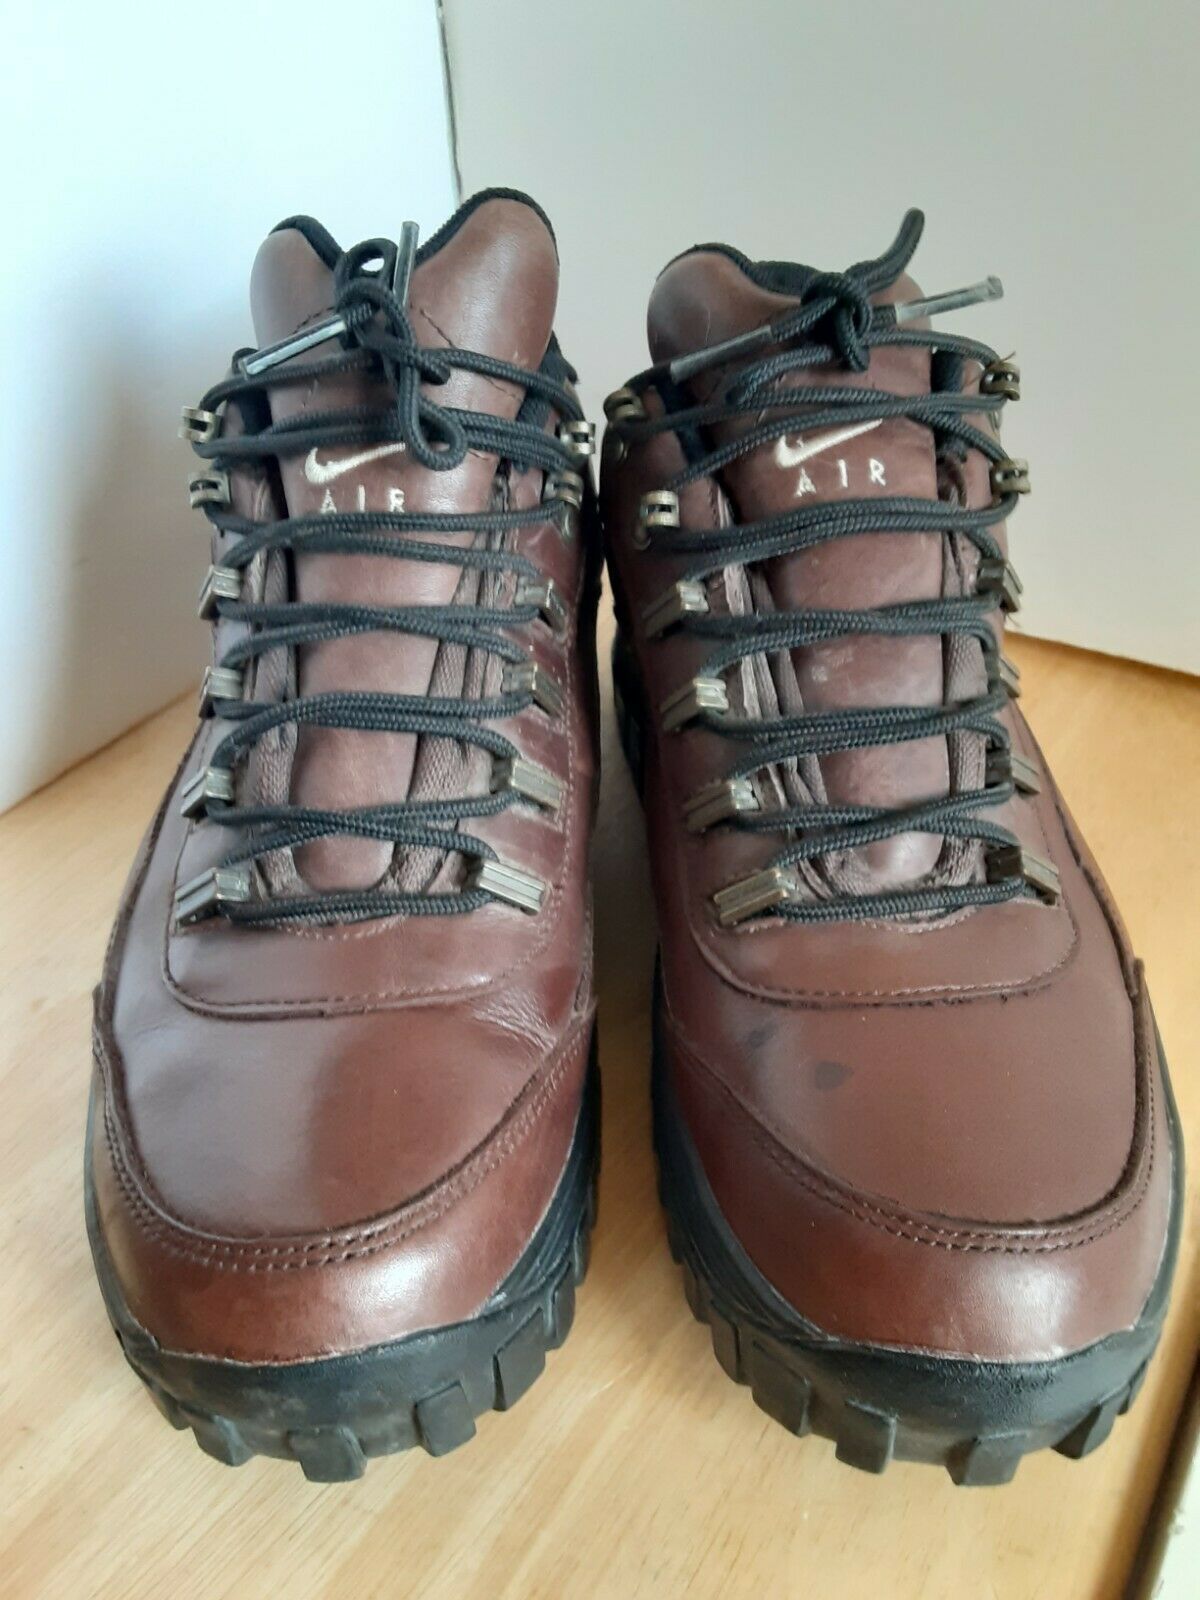 Vintage 90’s Nike Air ACG Brown Hiking Boots Shoes Men's Size 9 GREAT SHAPE